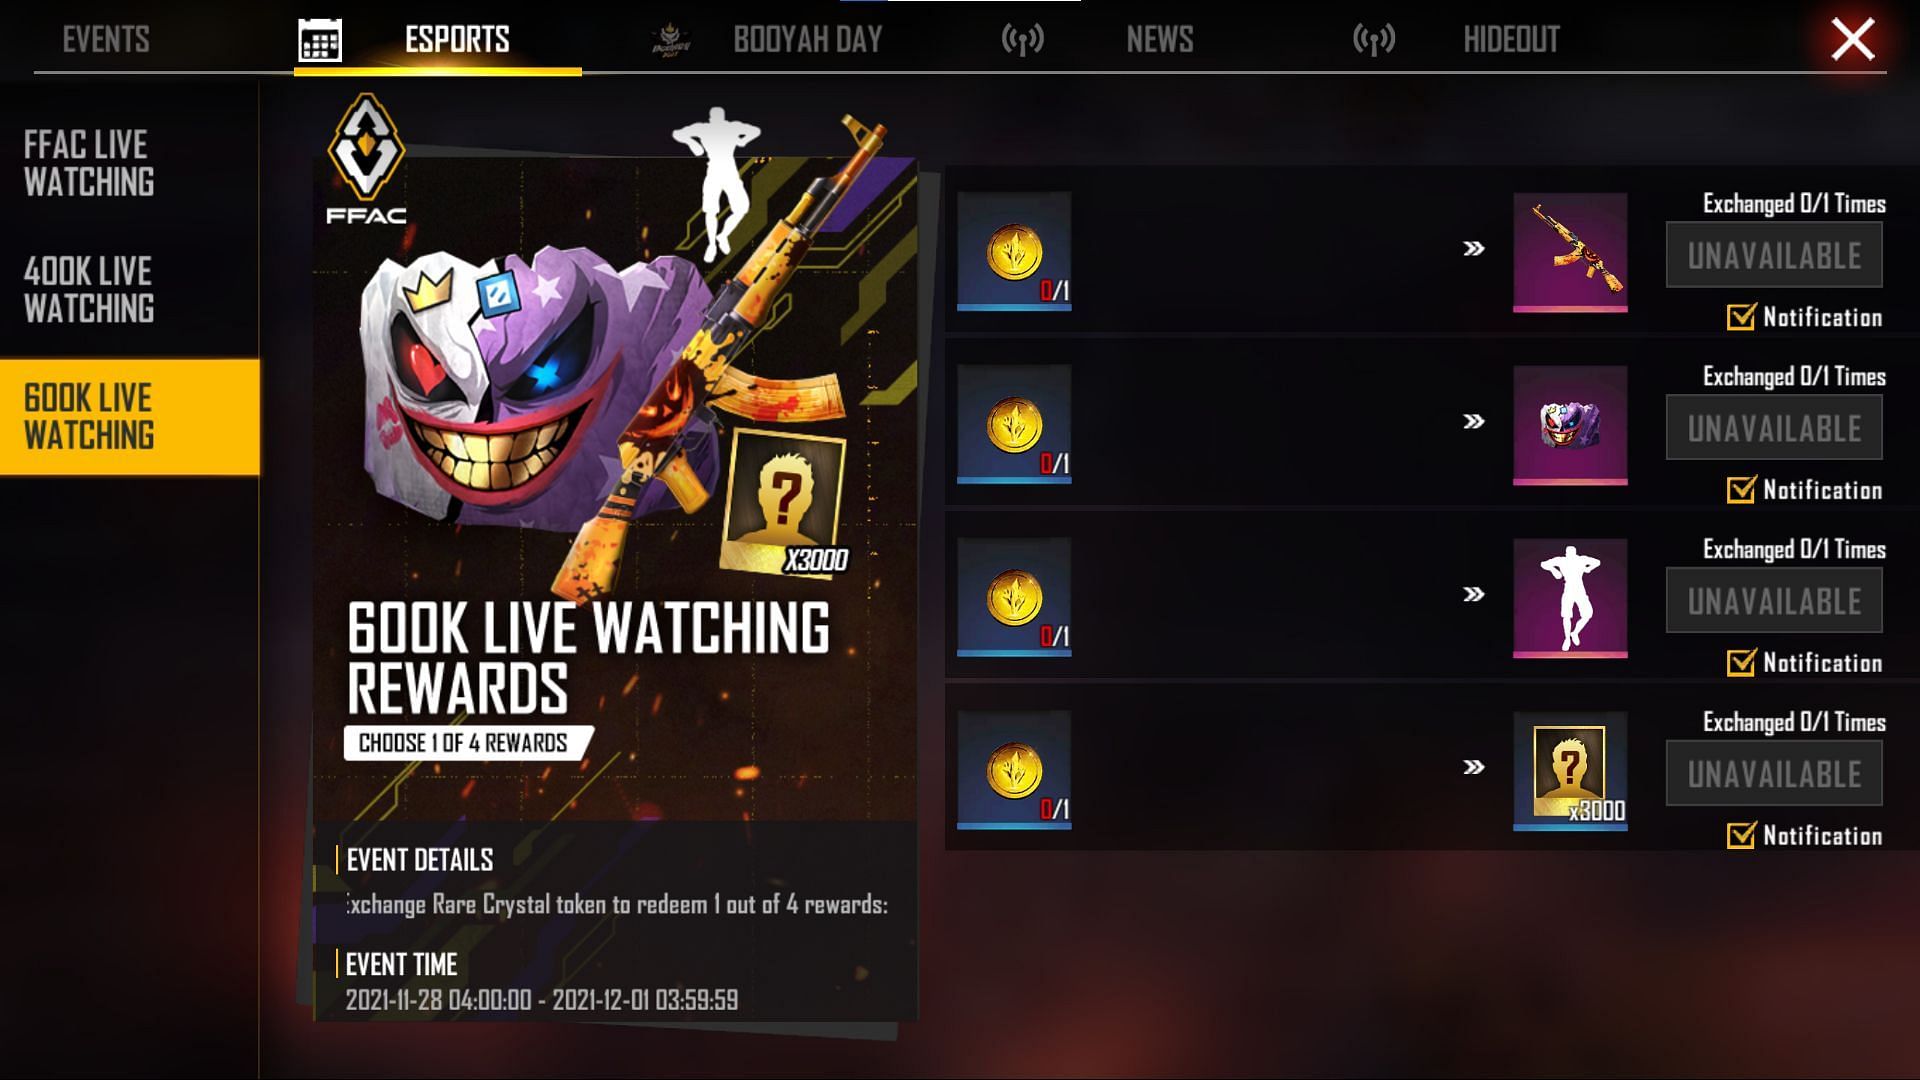 The rewards option for 600k watching (Image via Free Fire)